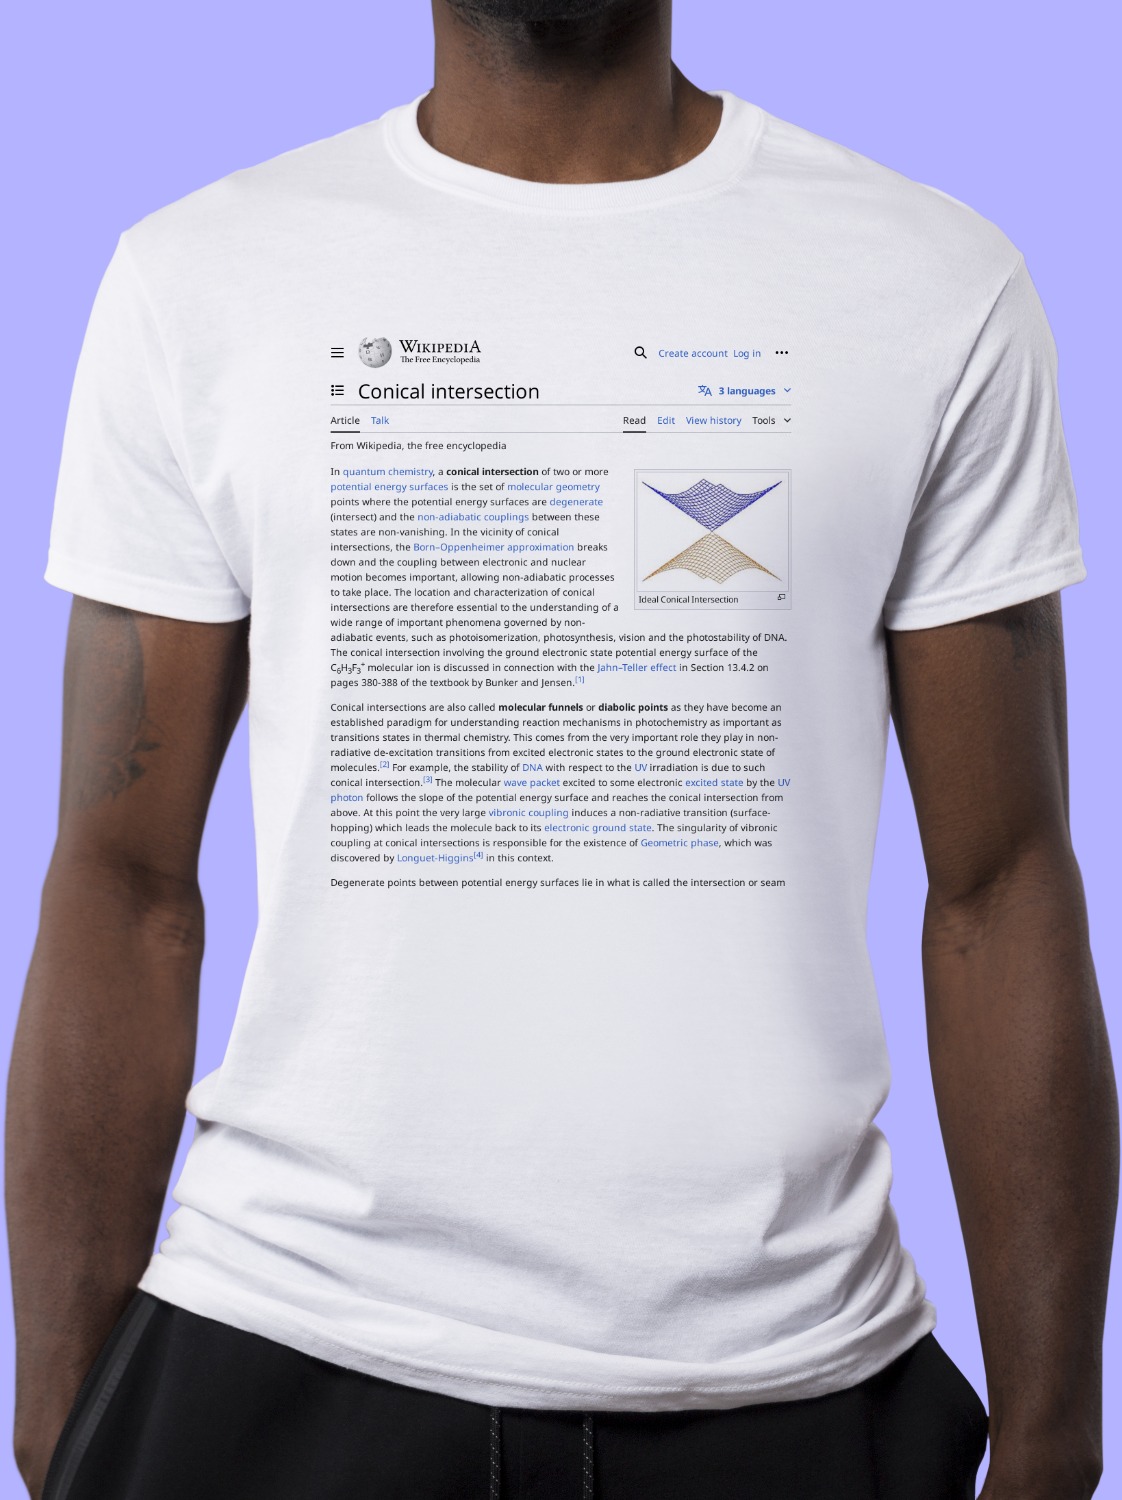 Conical_intersection Wikipedia Shirt